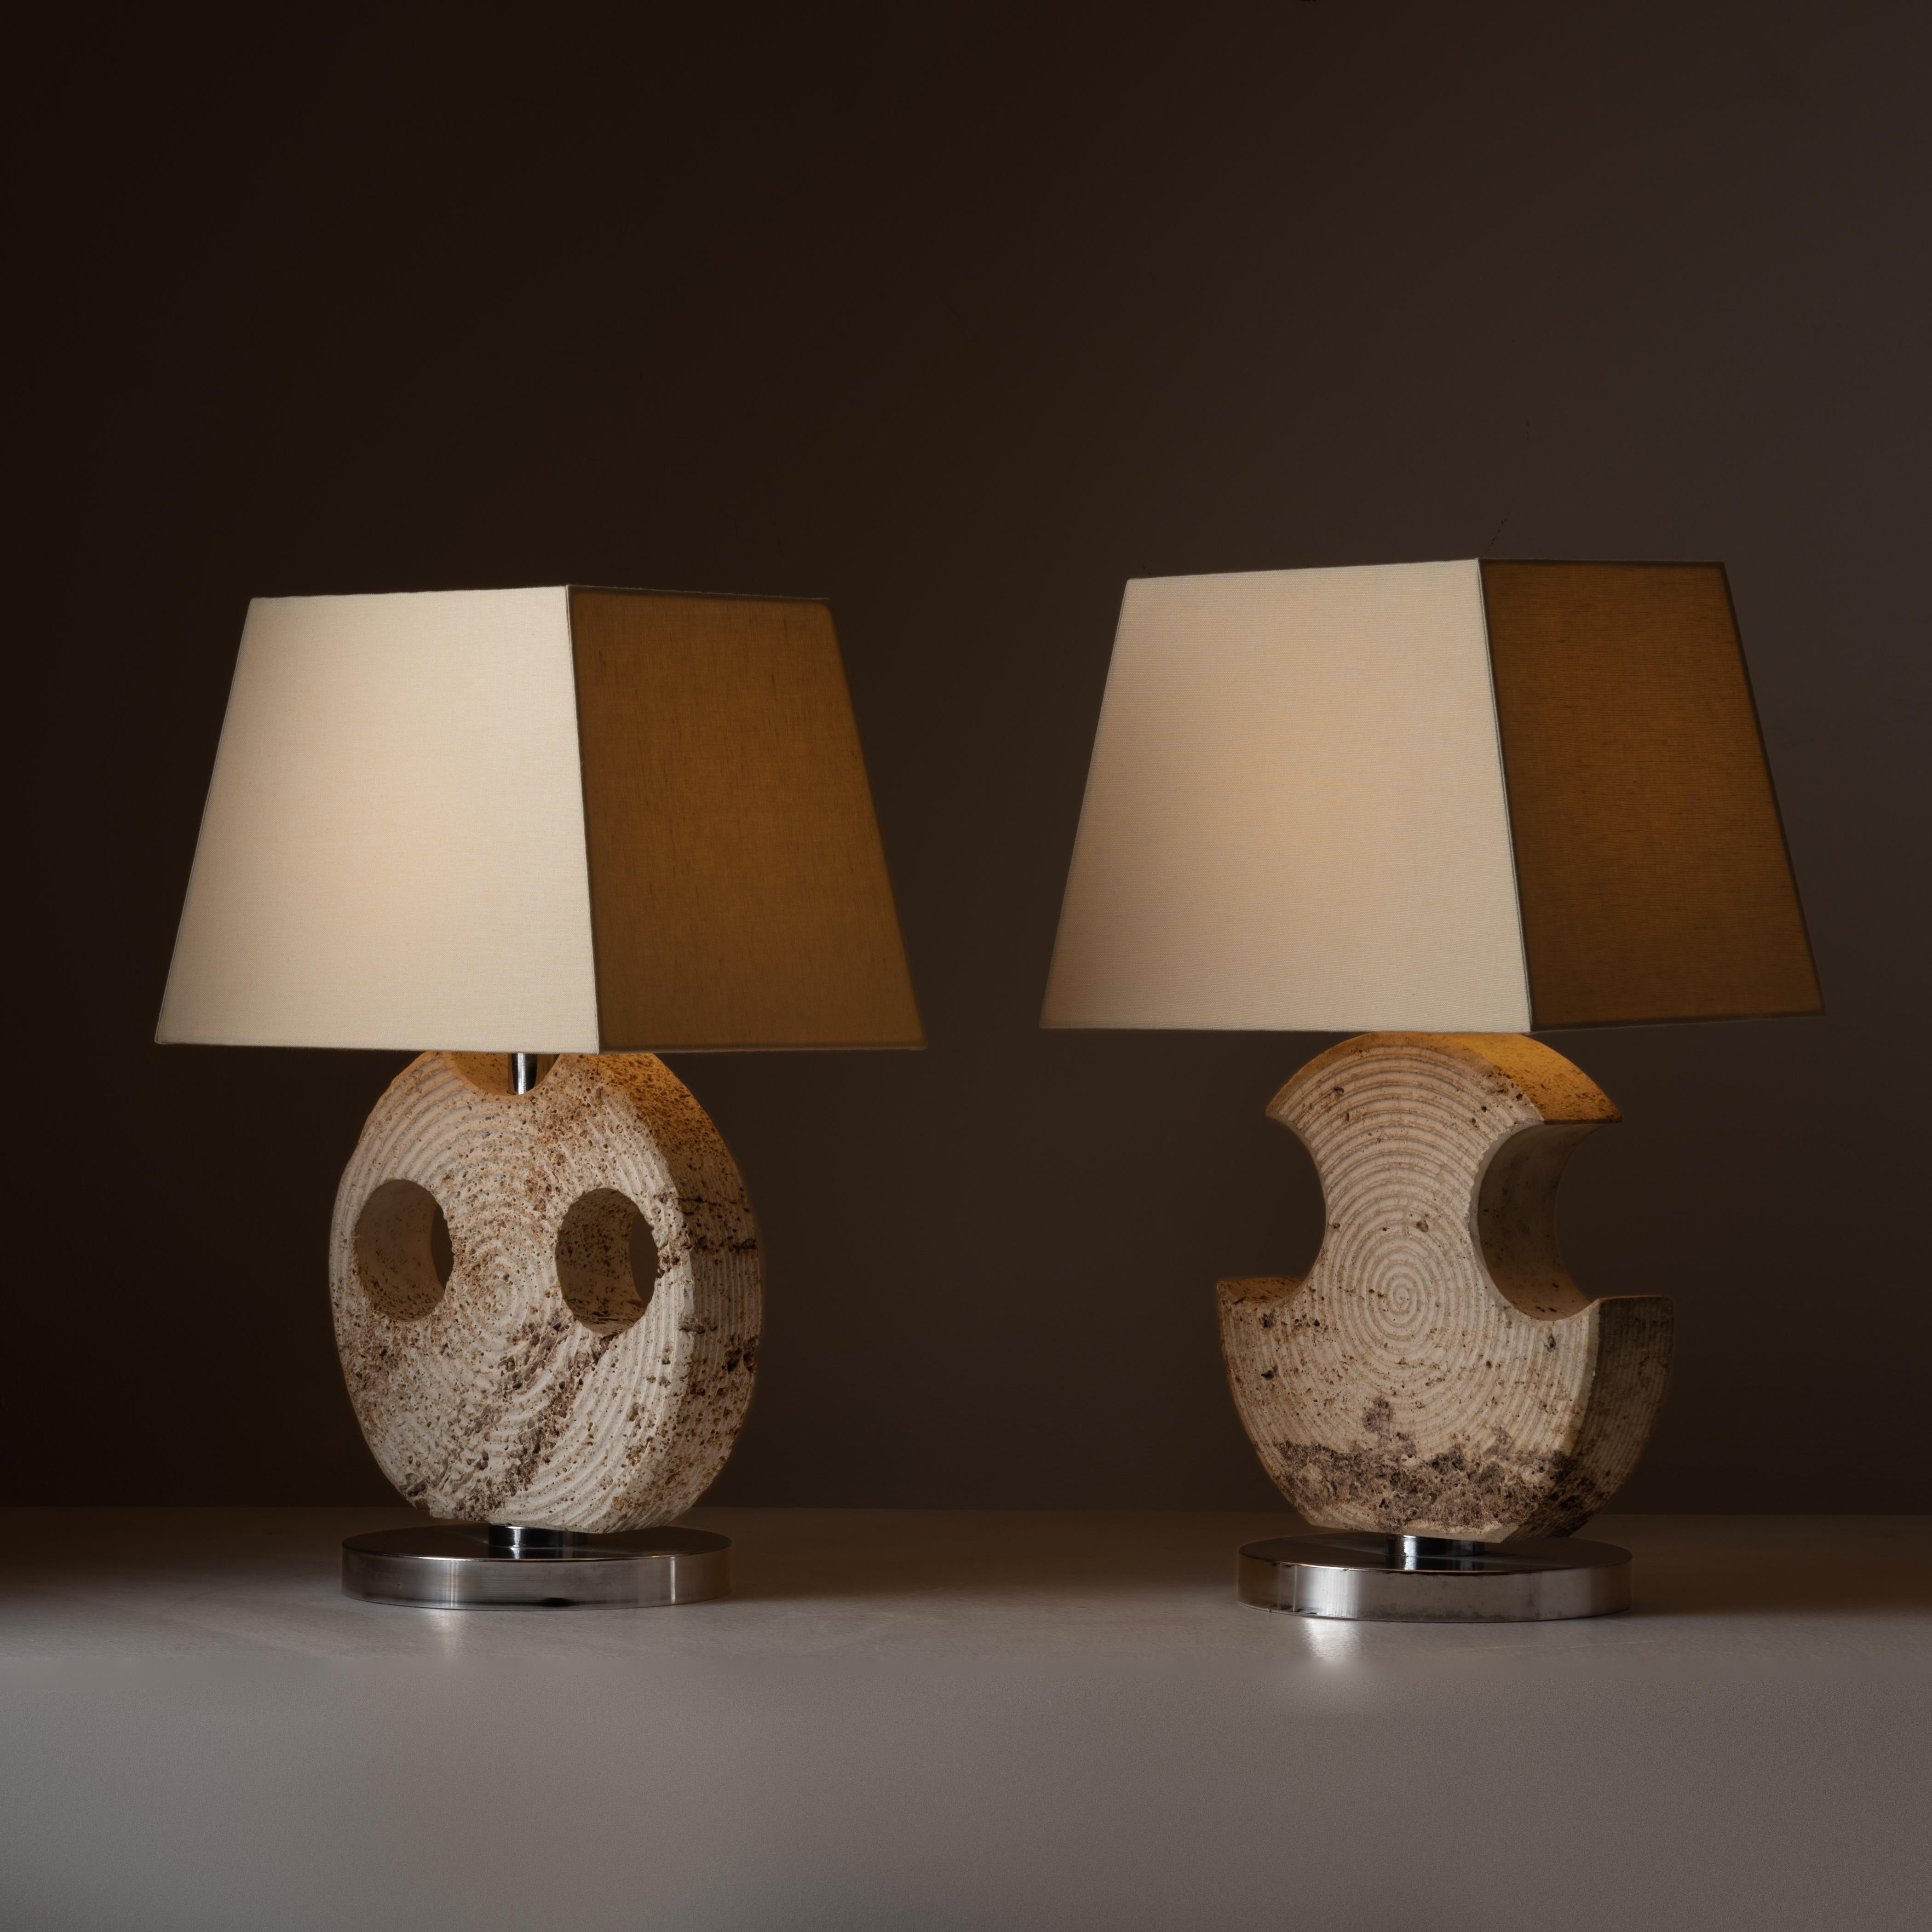 Pair of travertine table lamps by Studio CE. VA Milan. Designed and manufactured in Italy, circa 1970. Sculptural and carved travertine table lamps, with chrome finish circular bases and beige linen shades. Each lamp holds one E27 bulb socket. We